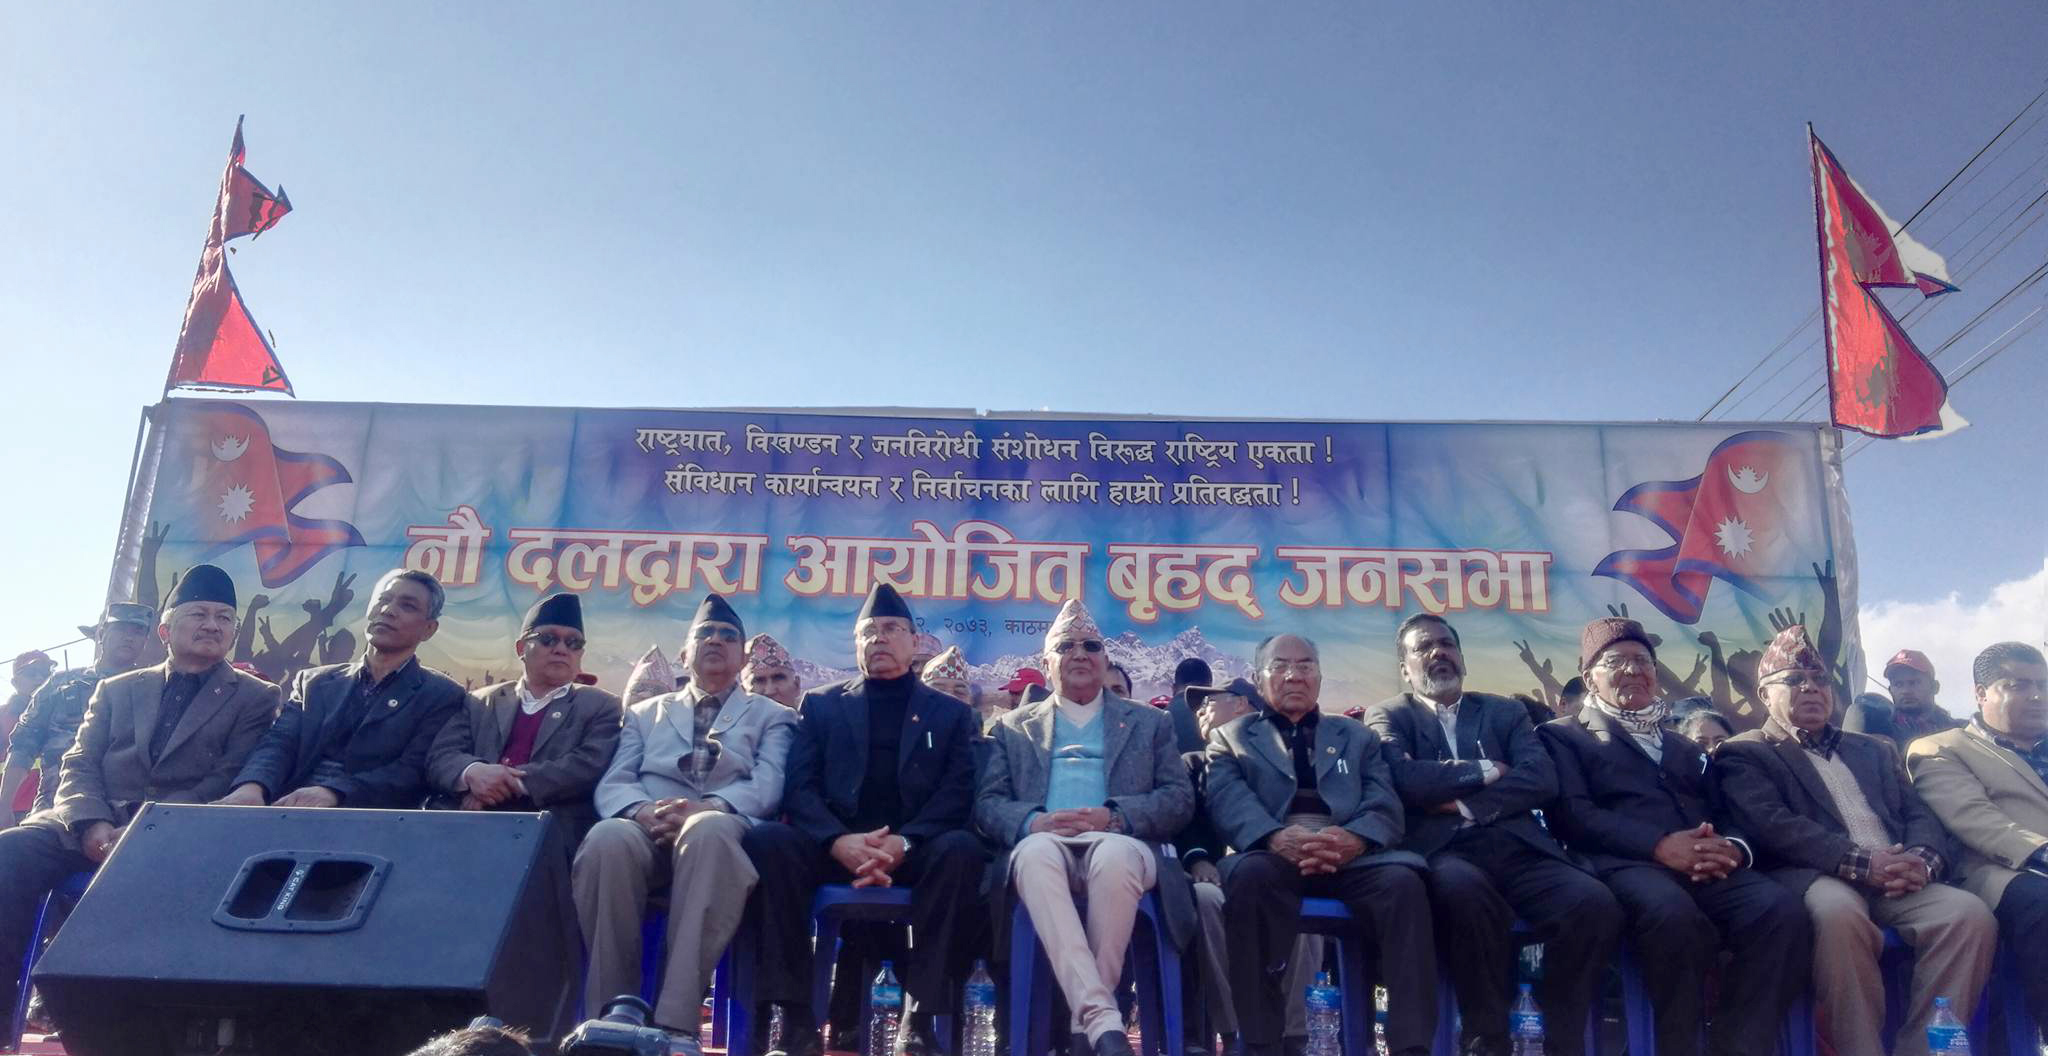 Nationalist campaign led by CPN-UML will emerge victorious: Pokharel